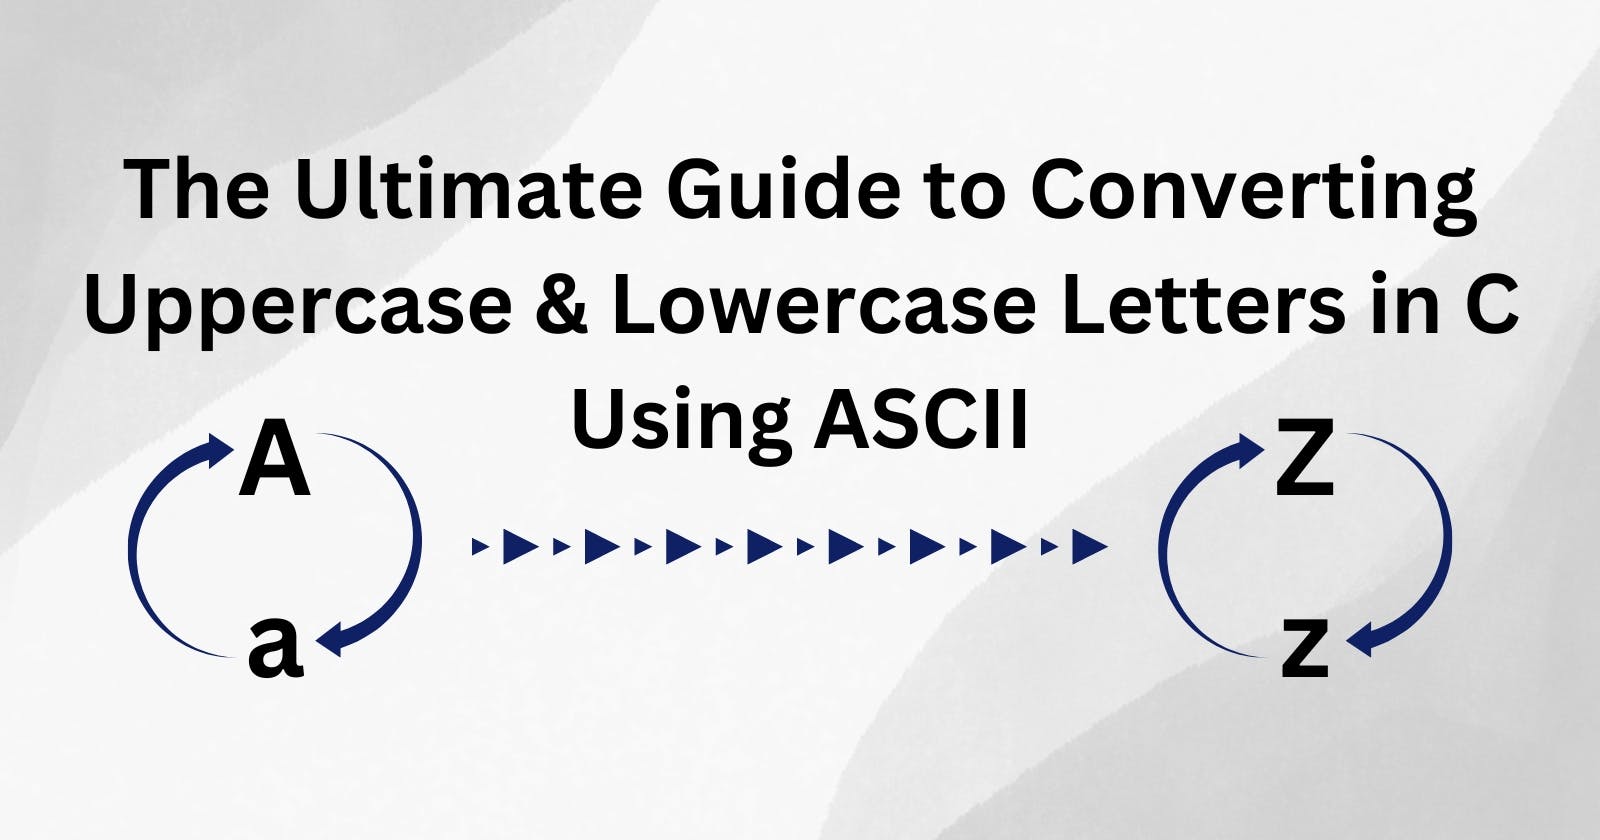 The Ultimate Guide to Converting Uppercase and Lowercase Letters in C Using ASCII